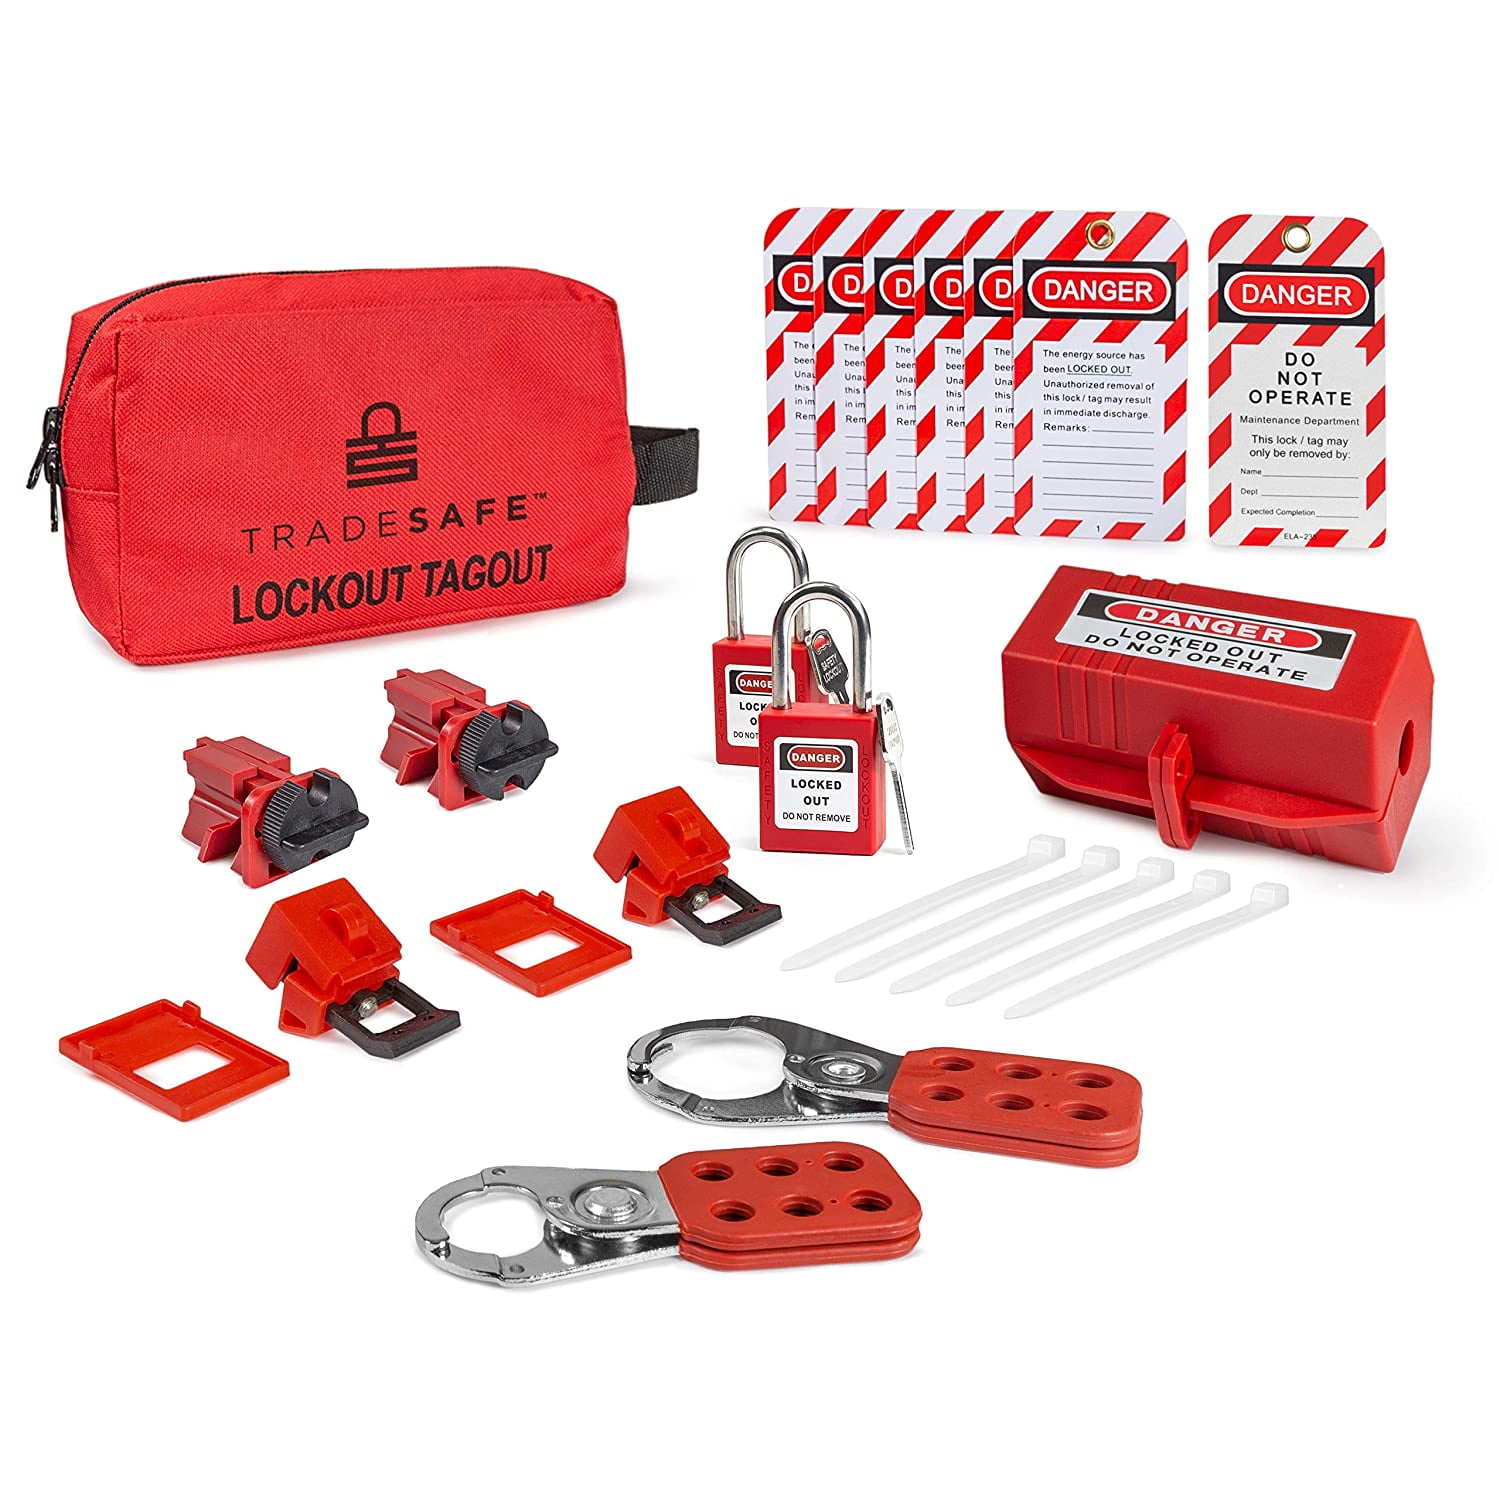 Lockout Tagout Kit With Station 6 Loto Locks Non Conductive Body Grade RED Details about   LWO 